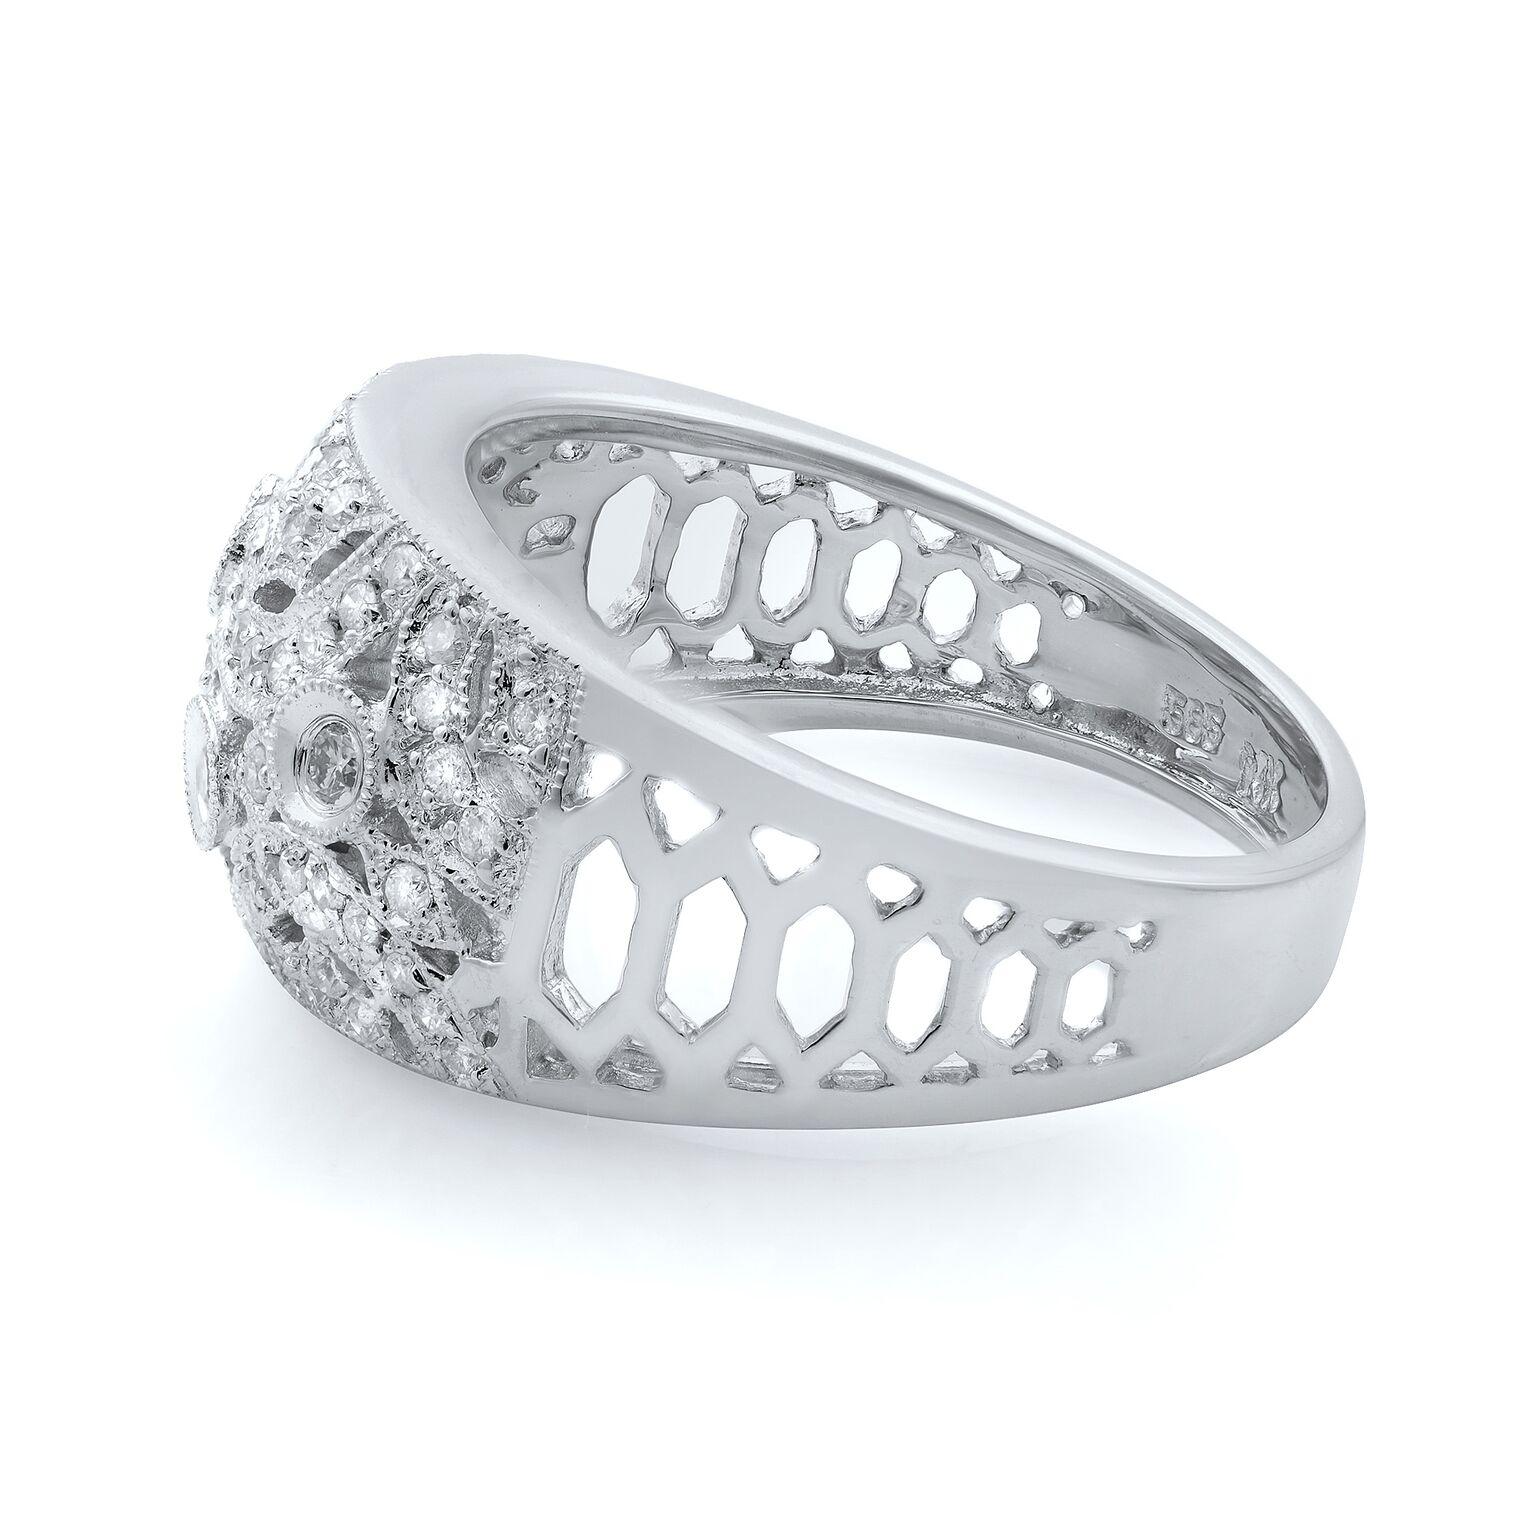 Representing a beautiful wide fashion band with excellent round cut white diamond stones set in a dome shape band. This diamond ring is crafted in 14k white gold. The ring is set with natural round cut diamonds weighing 0.75ct. The diamonds have a